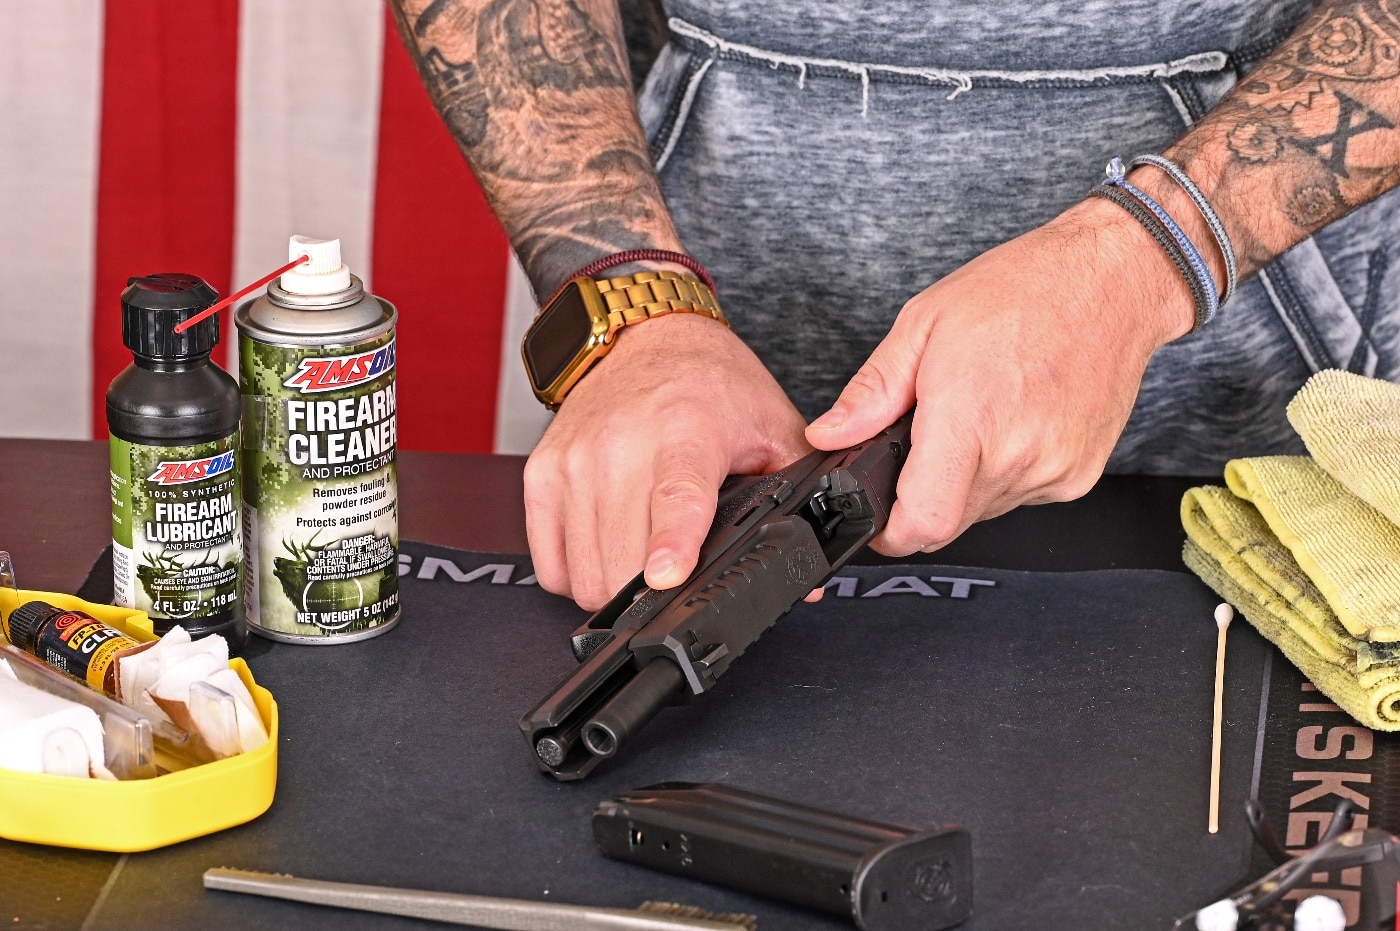 The author demonstrates proper gun handling in this photo. He is preparing to disassemble the gun, and points the gun in a safe direction. He removes the magazine and checks the chamber prior to giving it a general cleaning. Many gun accidents happen when people aren't sure the gun is unloaded. You must ensure the gun is unloaded prior to cleaning it. Keep the gun pointed in a safe direction until it is completely checked and field stripped.